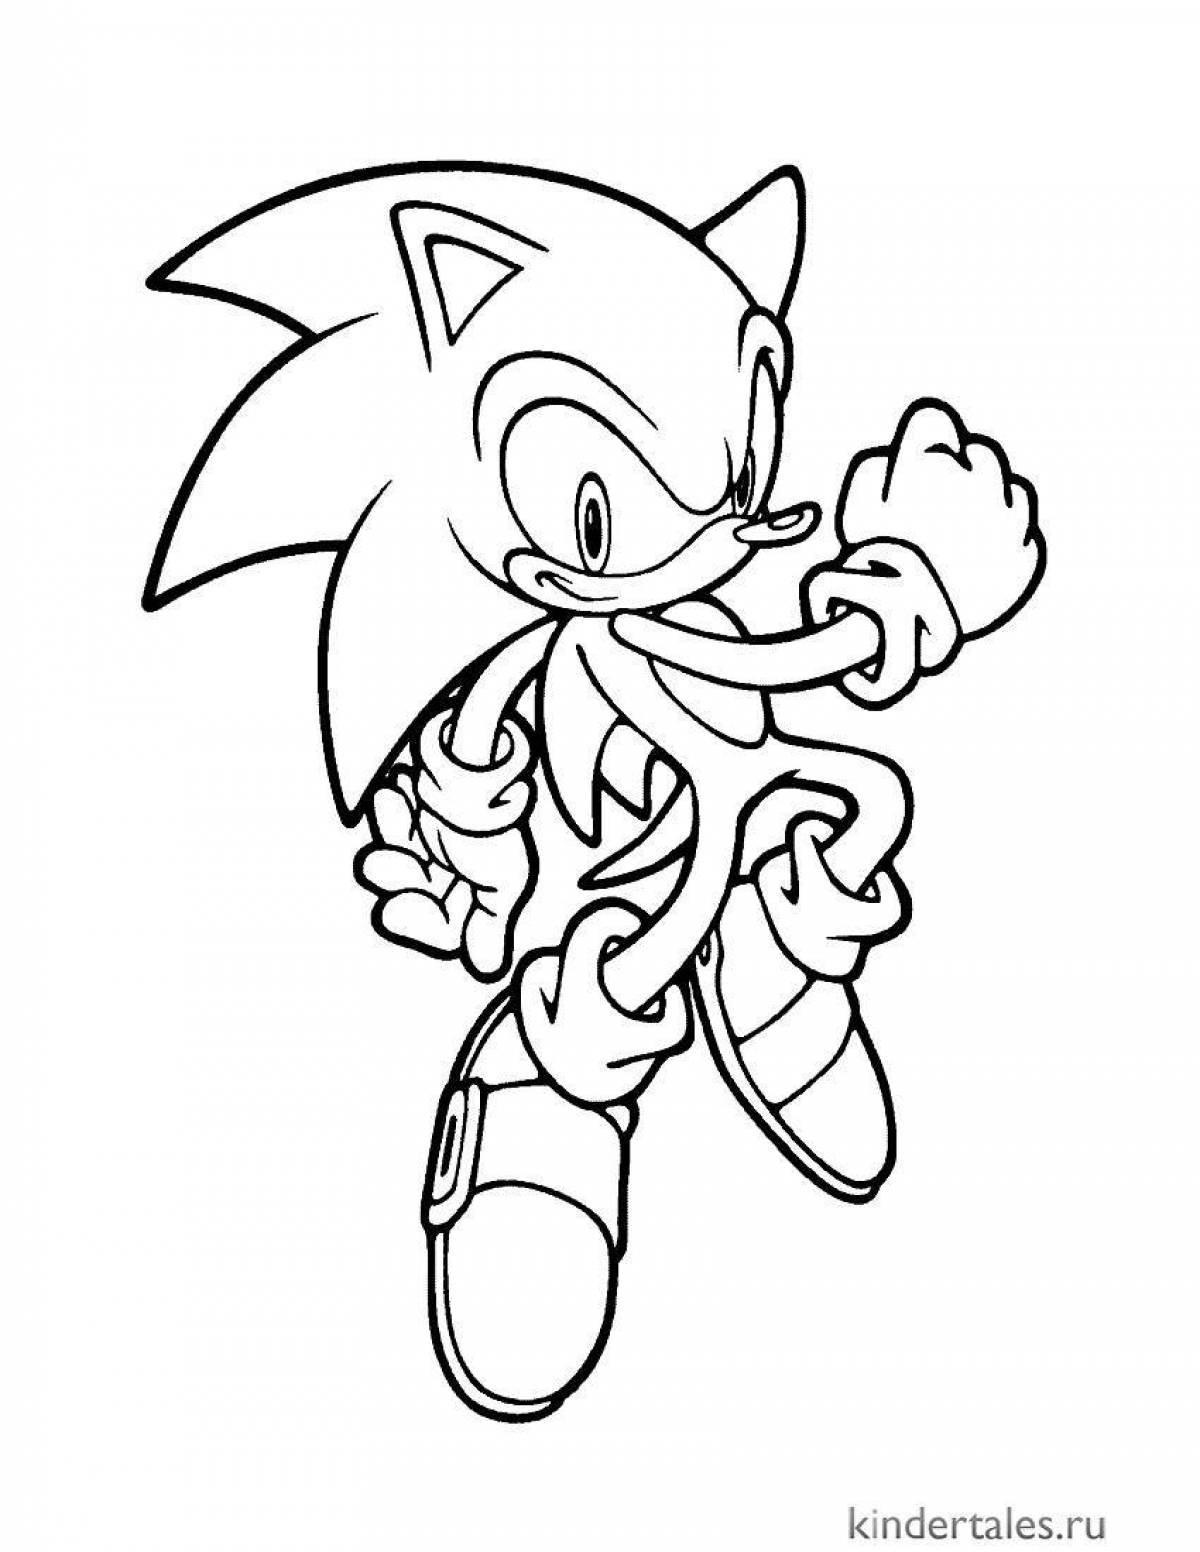 Mario and sonic amazing coloring book